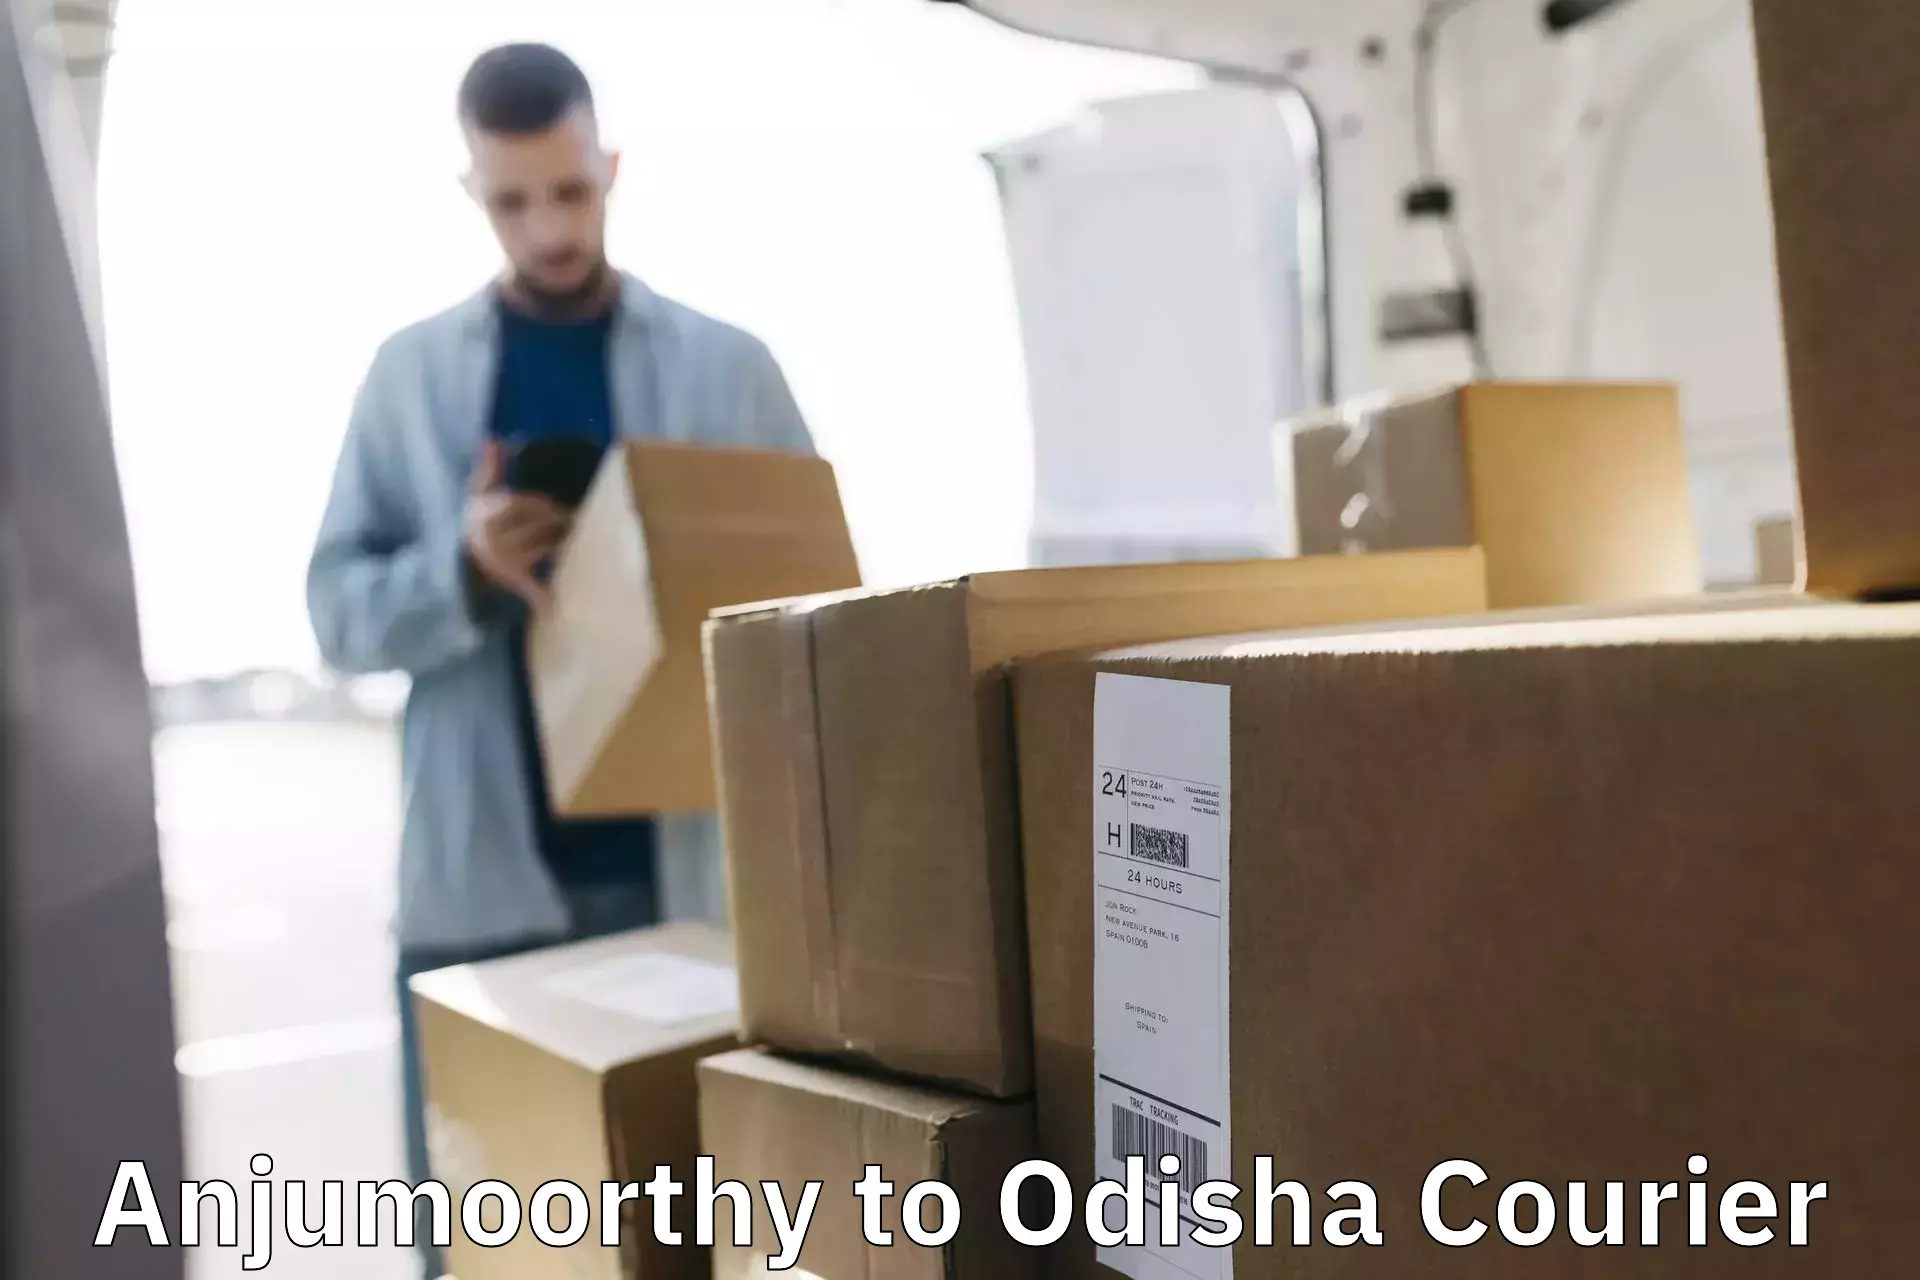 Discount courier rates in Anjumoorthy to Odisha